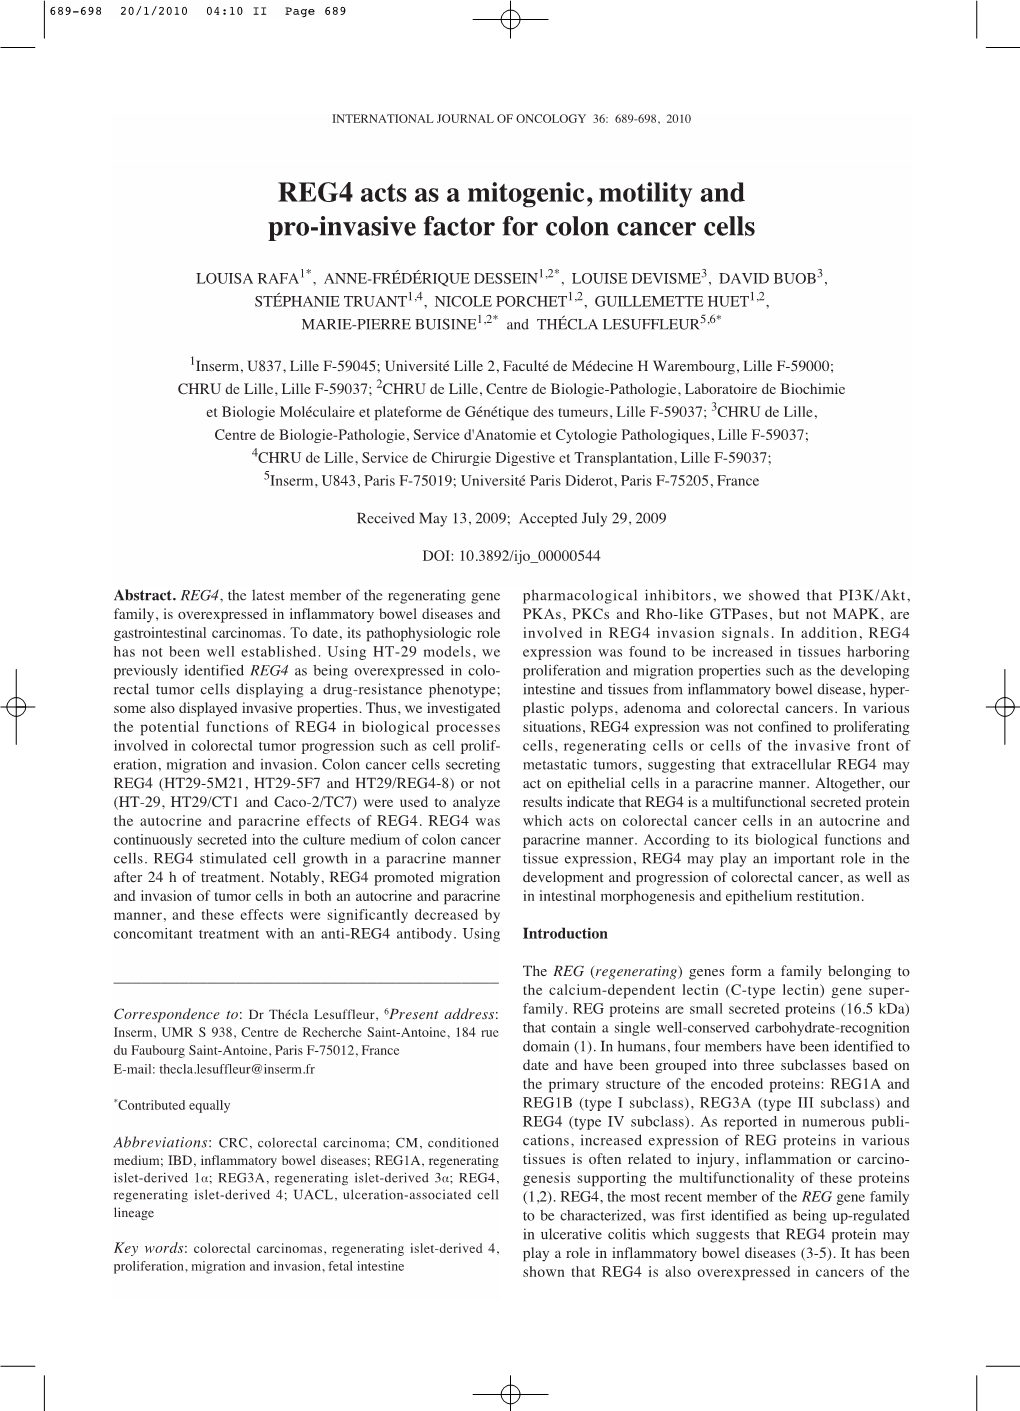 REG4 Acts As a Mitogenic, Motility and Pro-Invasive Factor for Colon Cancer Cells